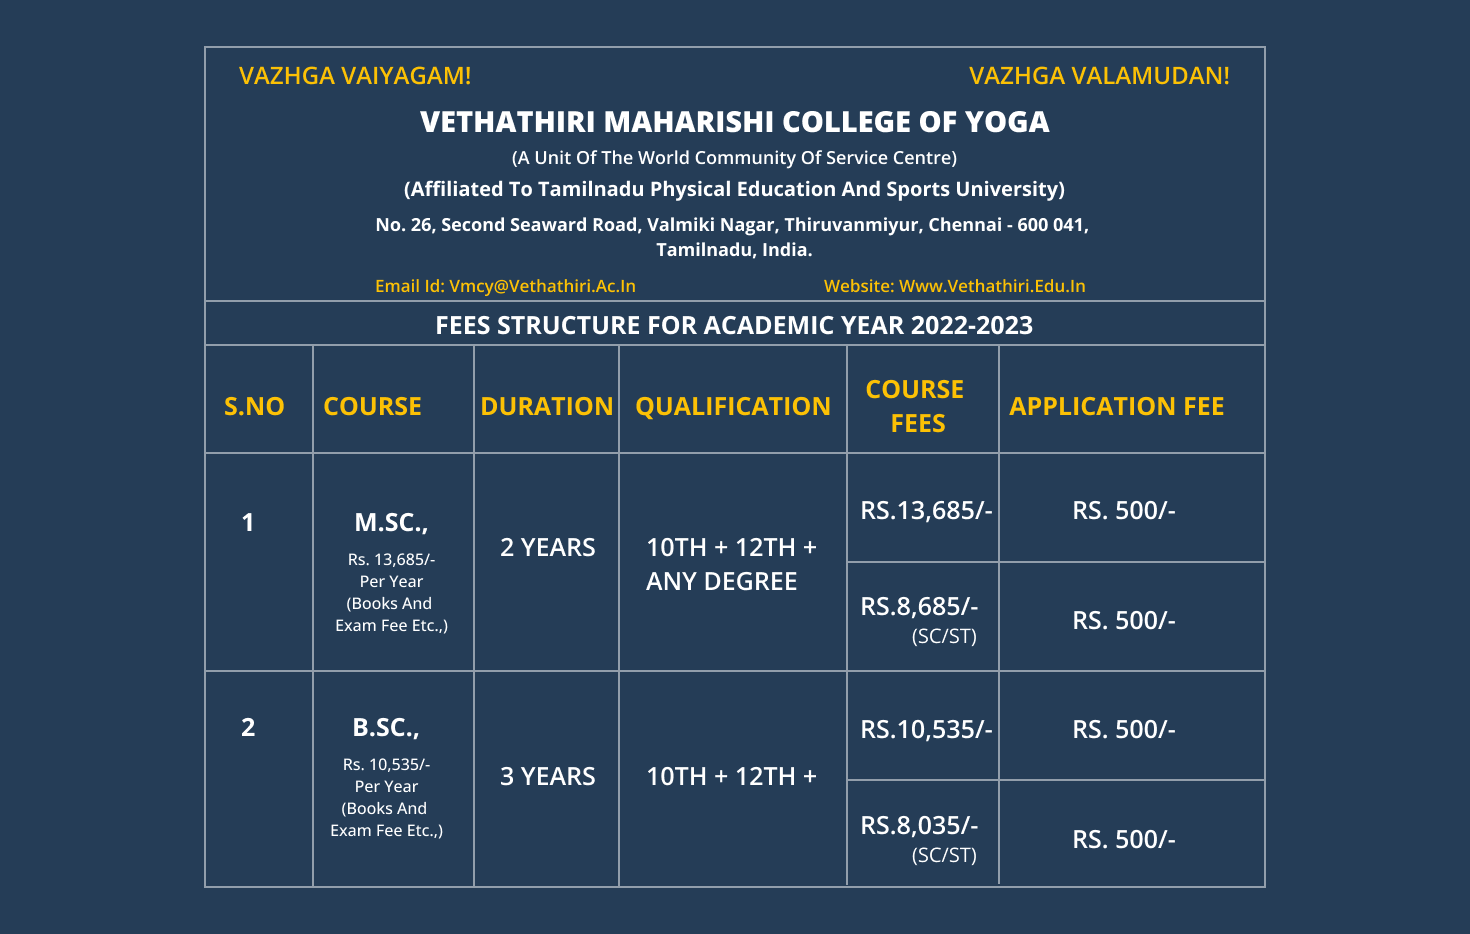 FEES STRUCTURE FOR ACADEMIC YEAR 2022-2023